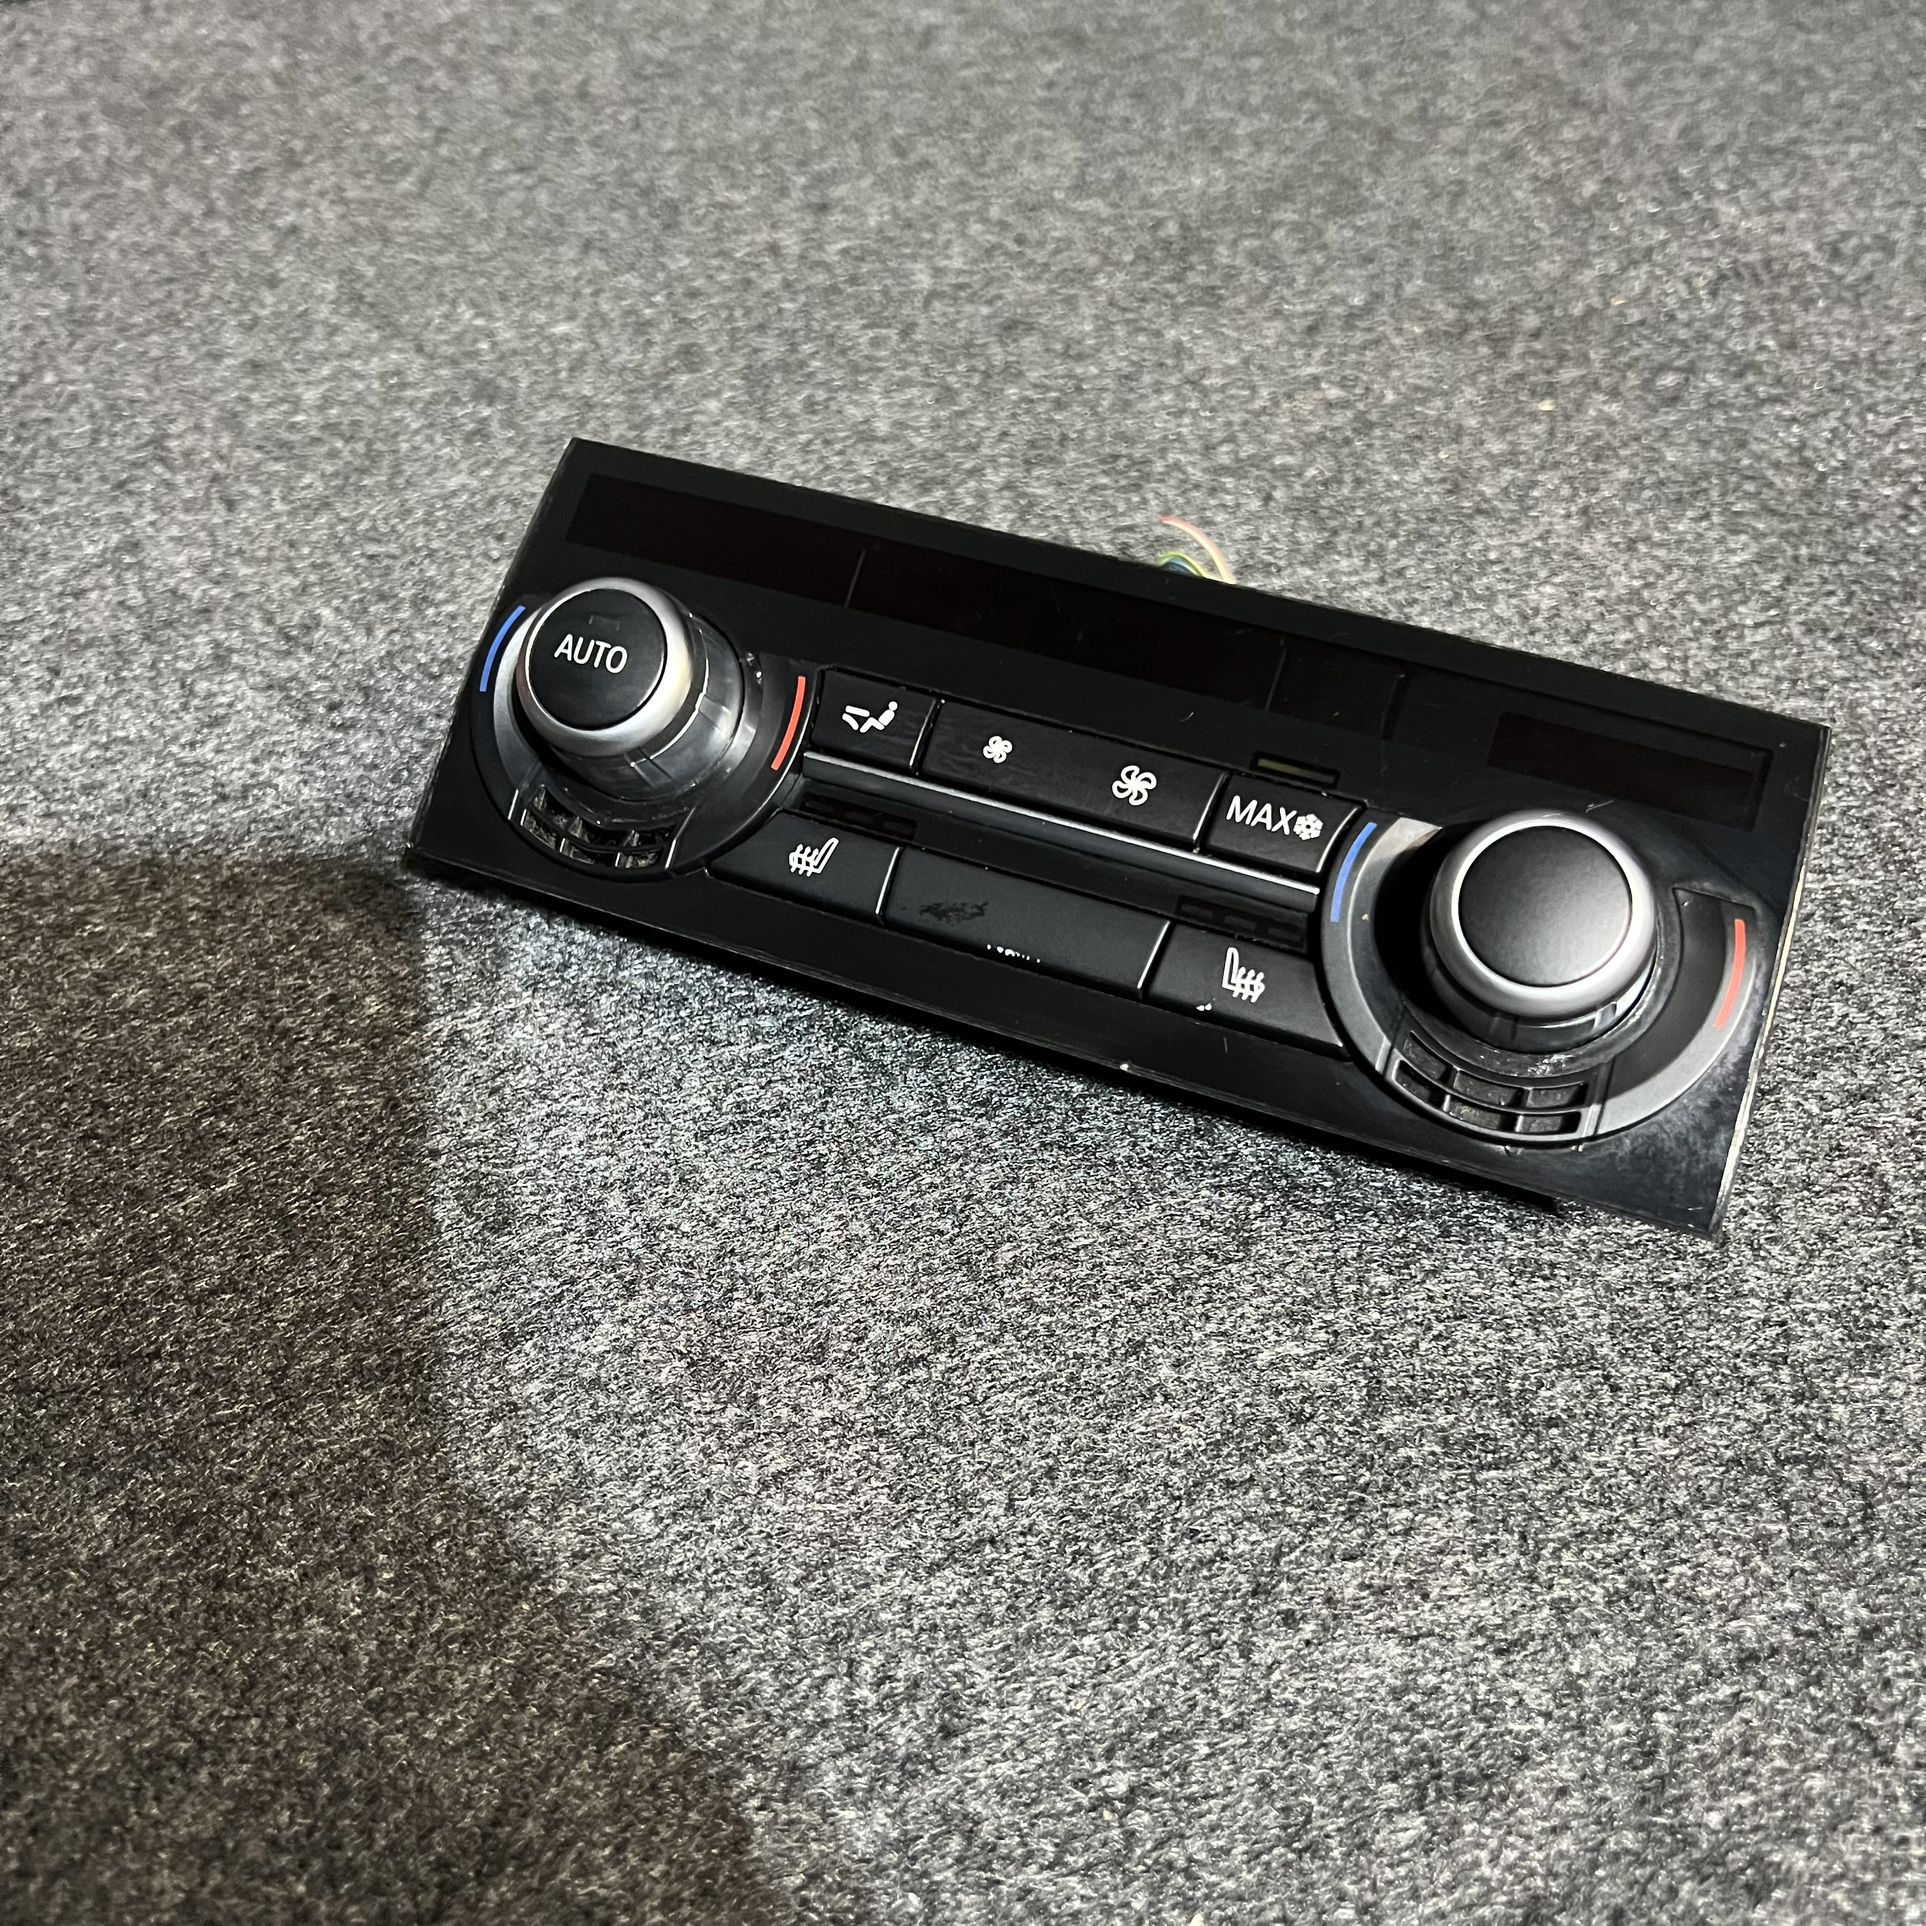 BMW 5 Series Rear Climate Control OEM (contact info removed)